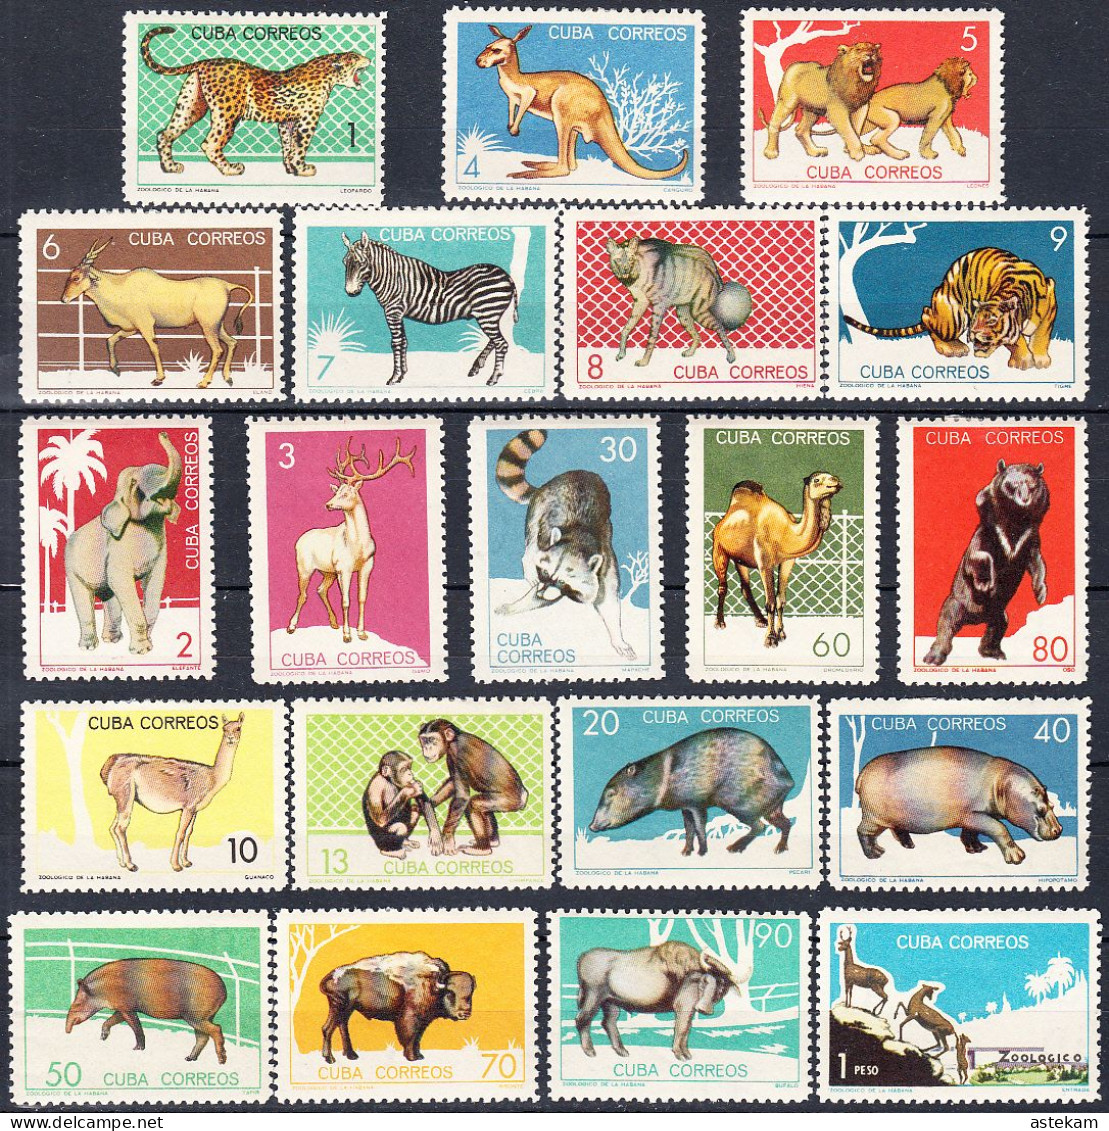 CUBA 1964, FAUNA, WILD ANIMALS From The HAVANA ZOO, COMPLETE MNH SERIES With ORIGINAL GLUE And PATCHES In GOOD QUALITY - Used Stamps